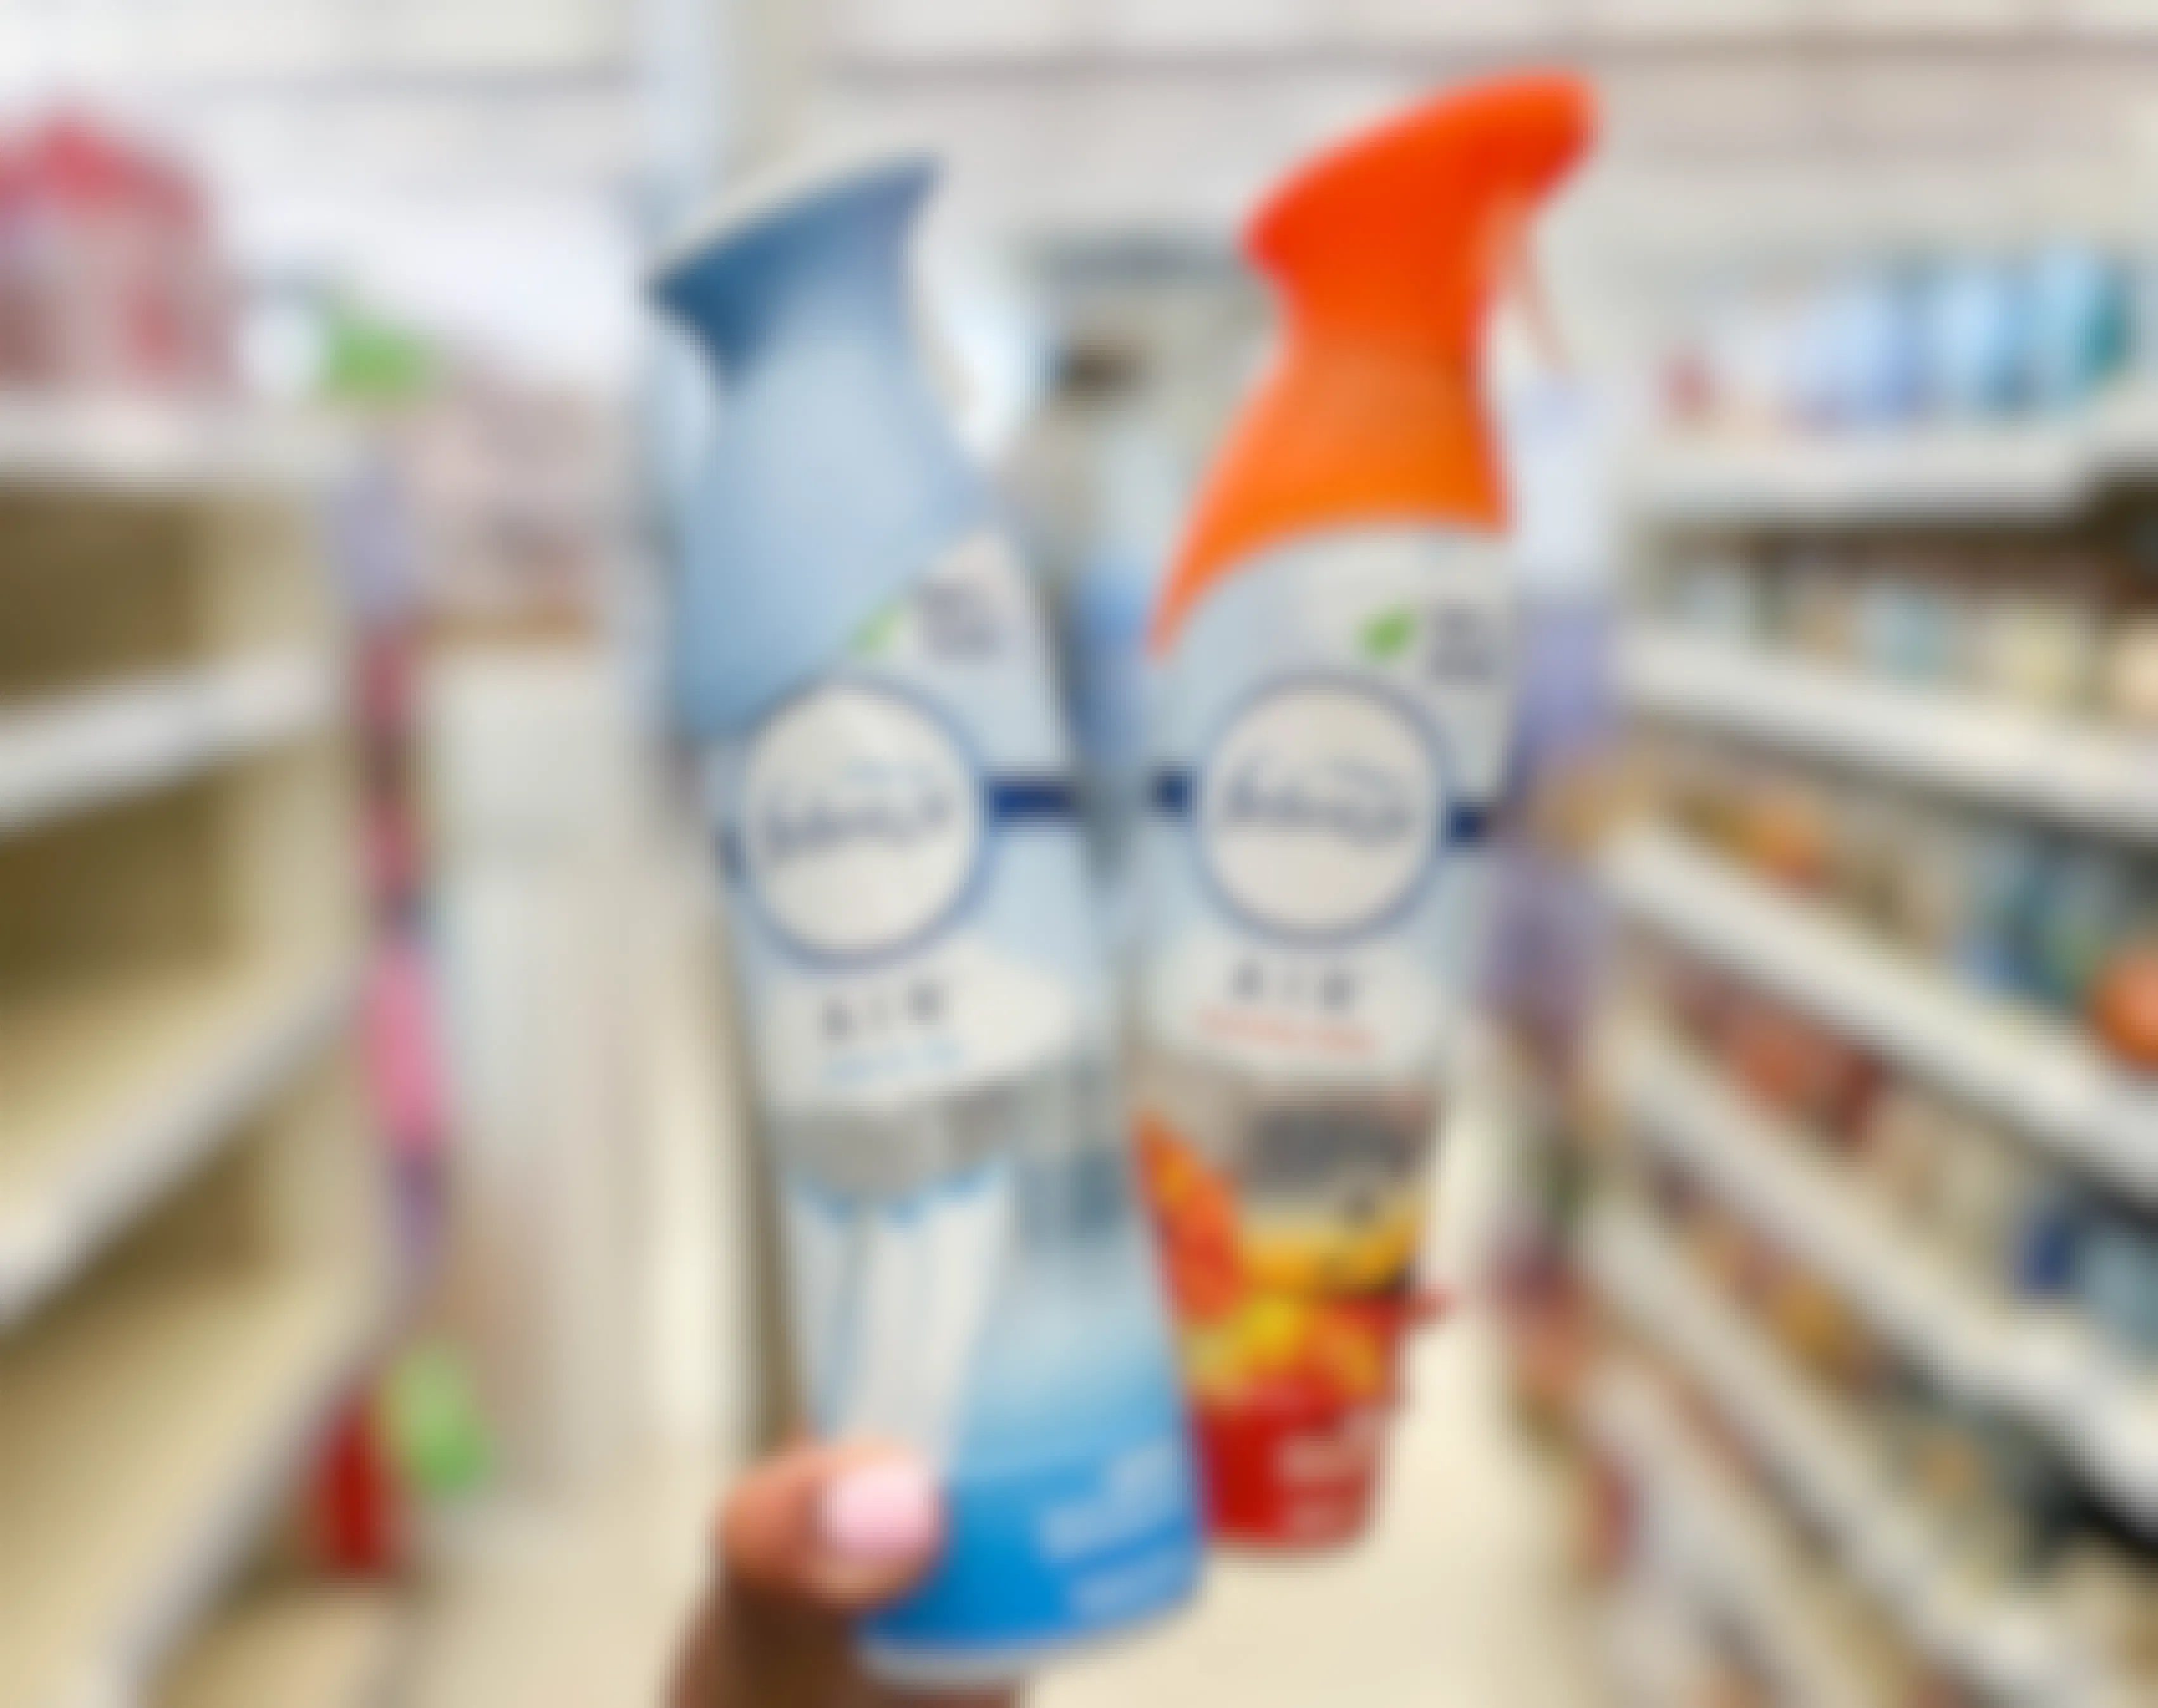 two cans of Febreze air freshener in aisle